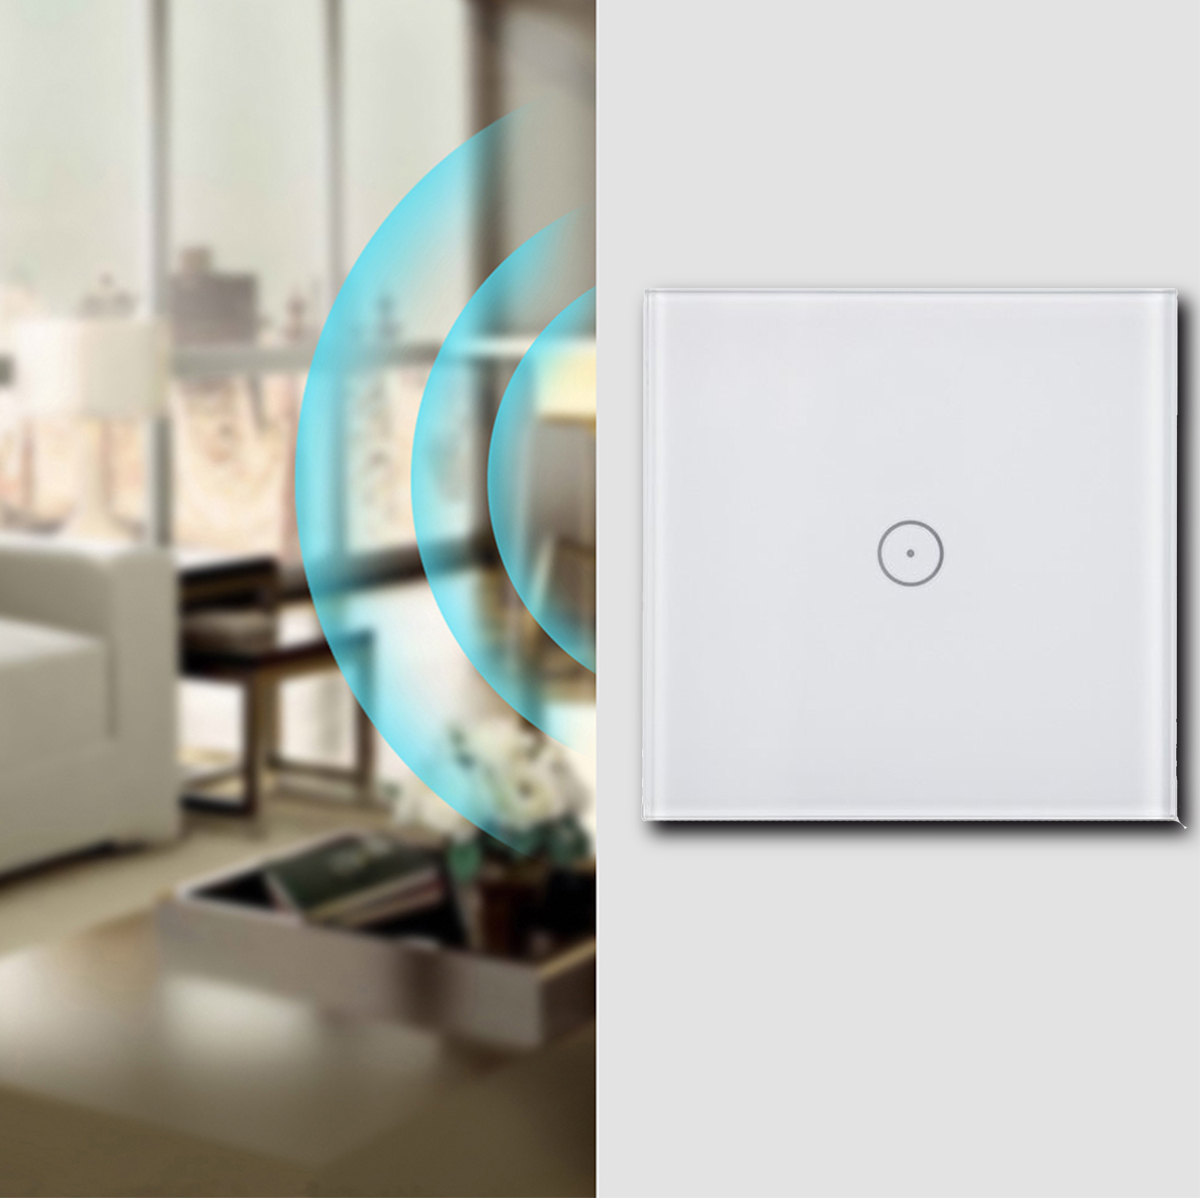 123-Gang-Smart-Home-WiFi-Touch-Light-Wall-Switch-Panel-For-Alexa-Google-Home-Assistant-1418937-1